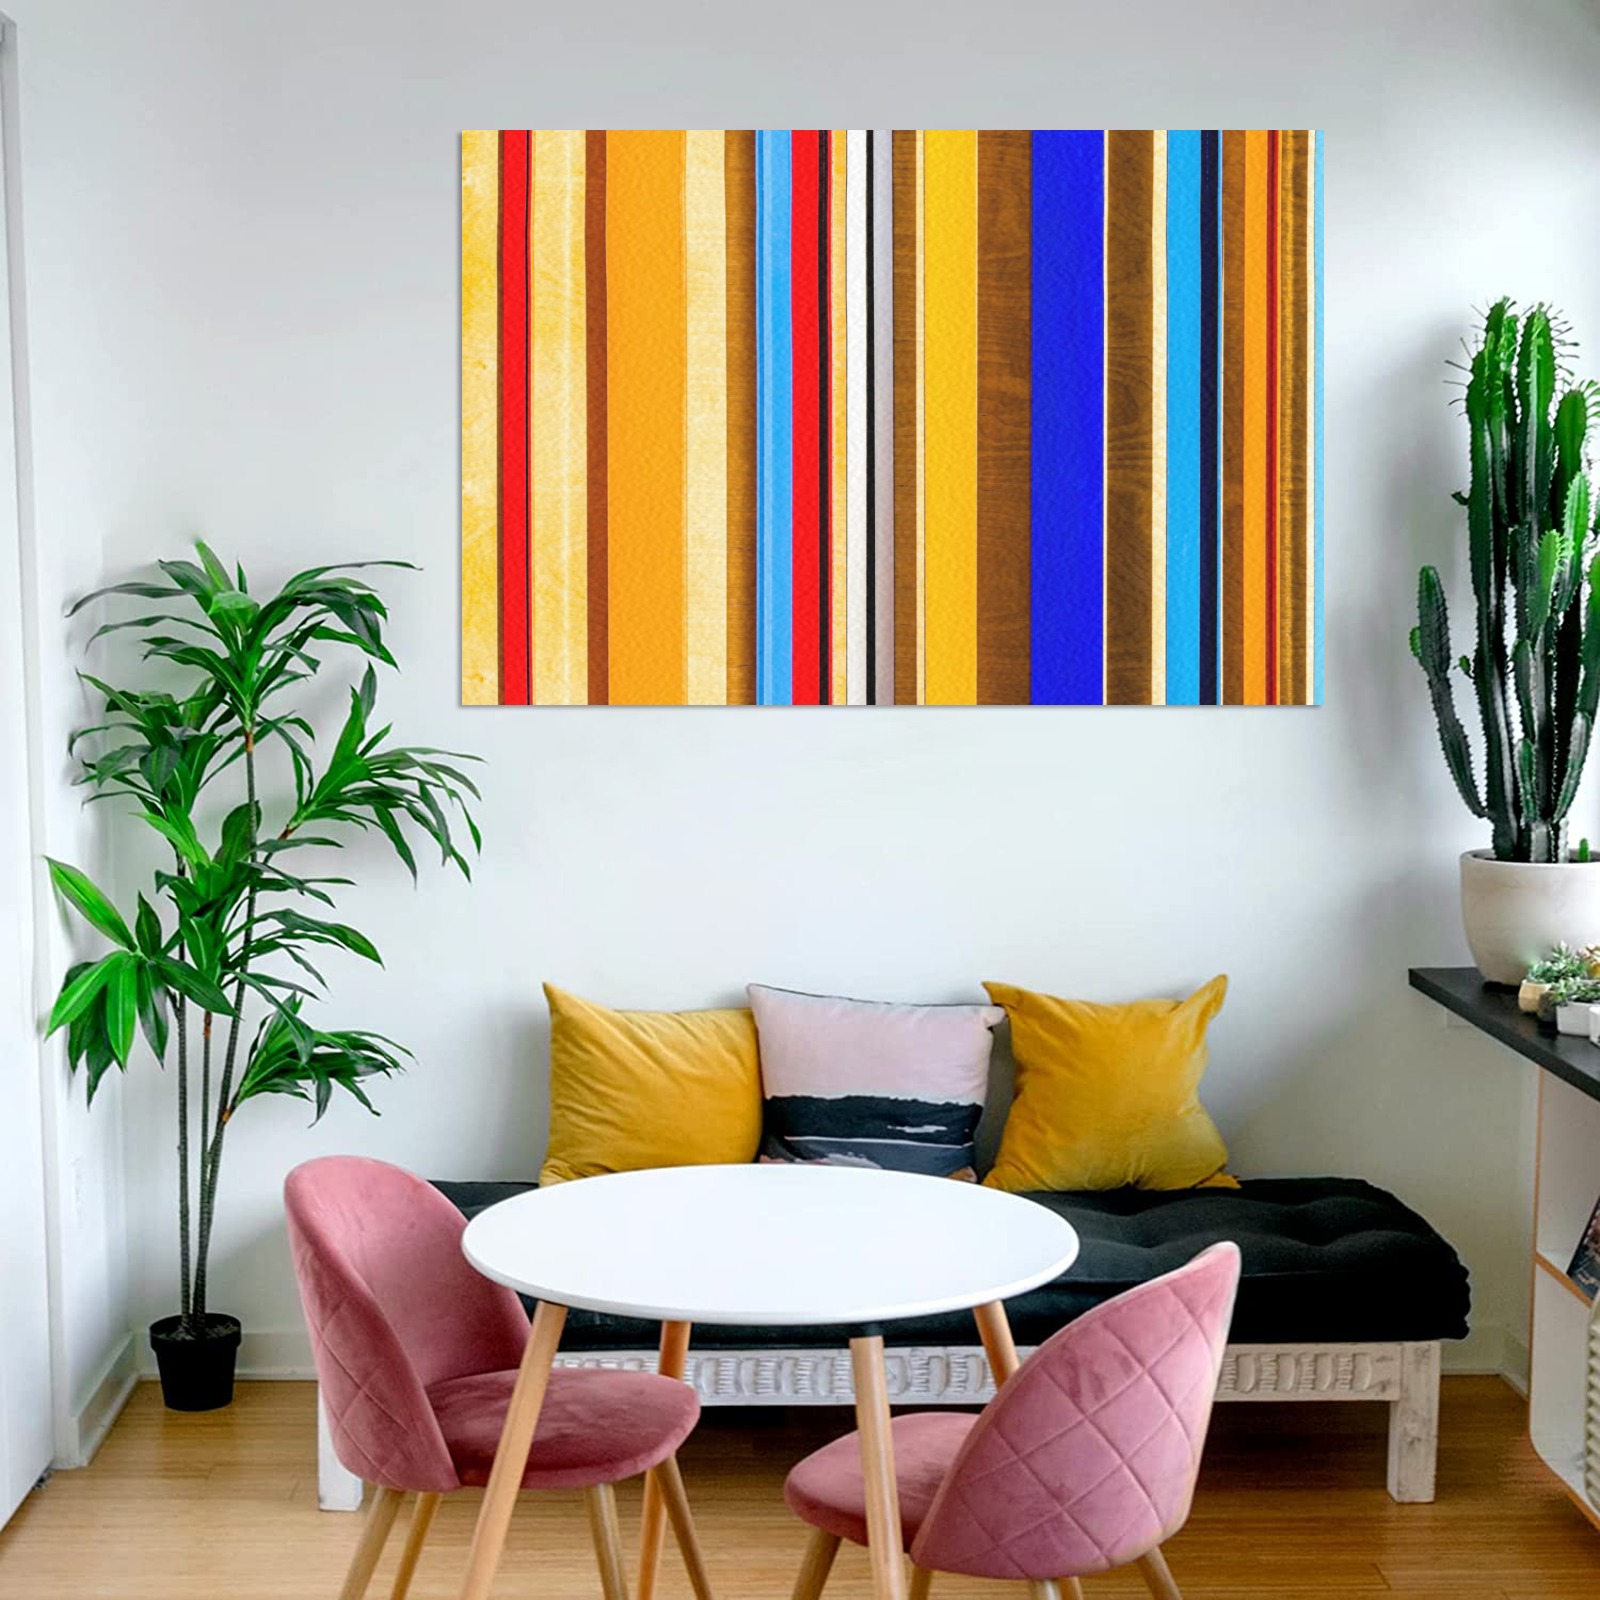 Colorful abstract pattern stripe art Frame Canvas Print 48"x32"